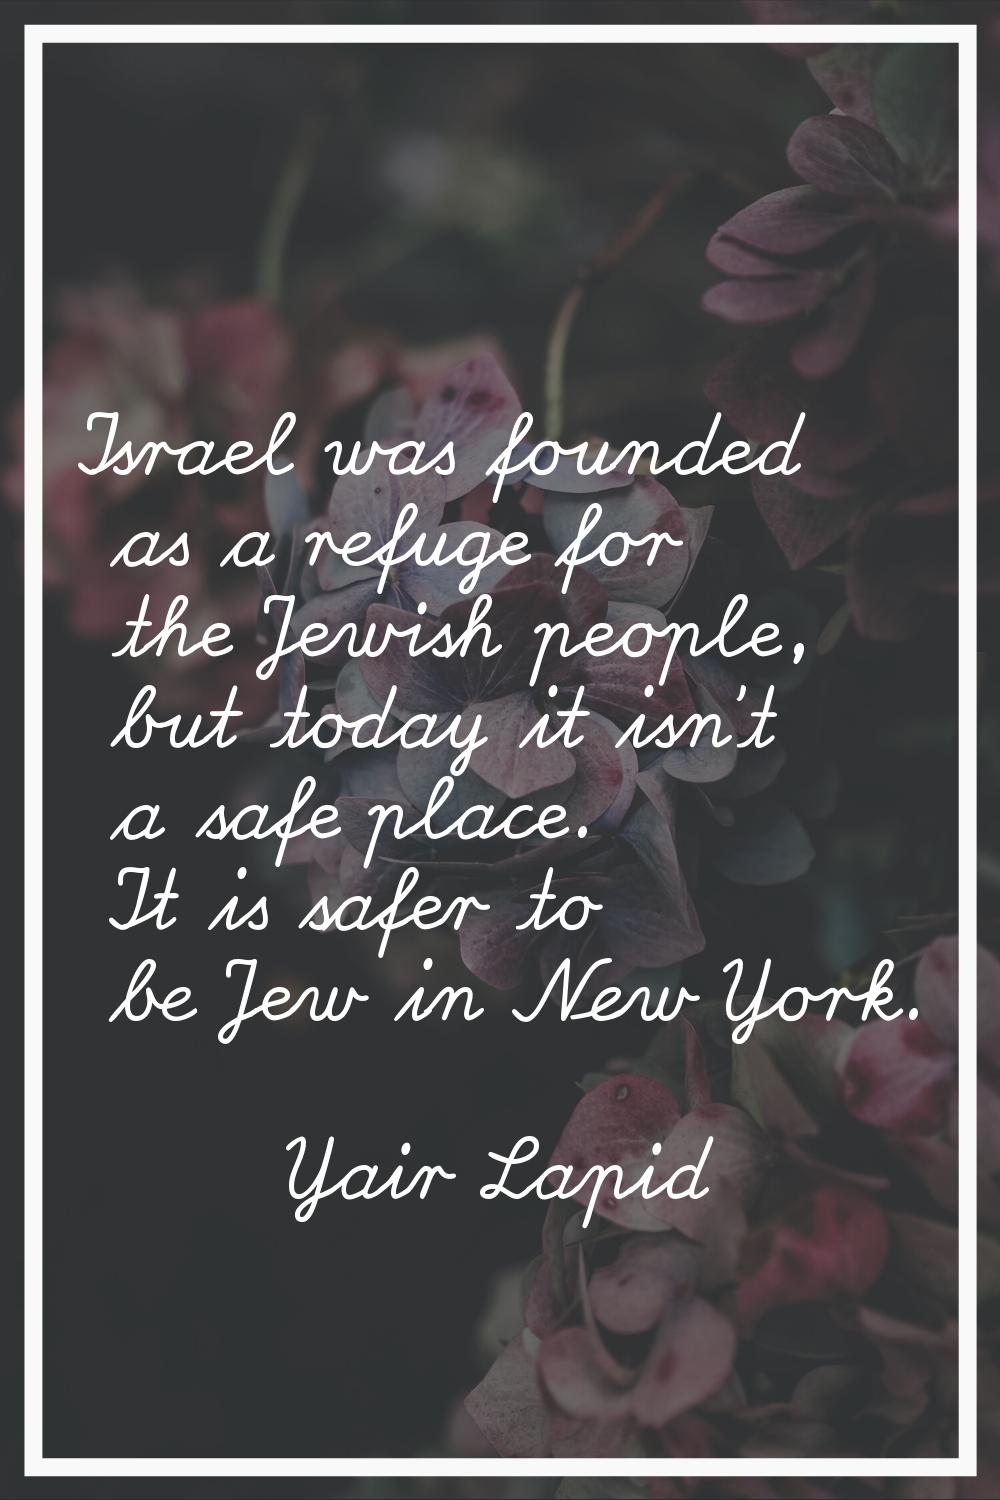 Israel was founded as a refuge for the Jewish people, but today it isn't a safe place. It is safer 